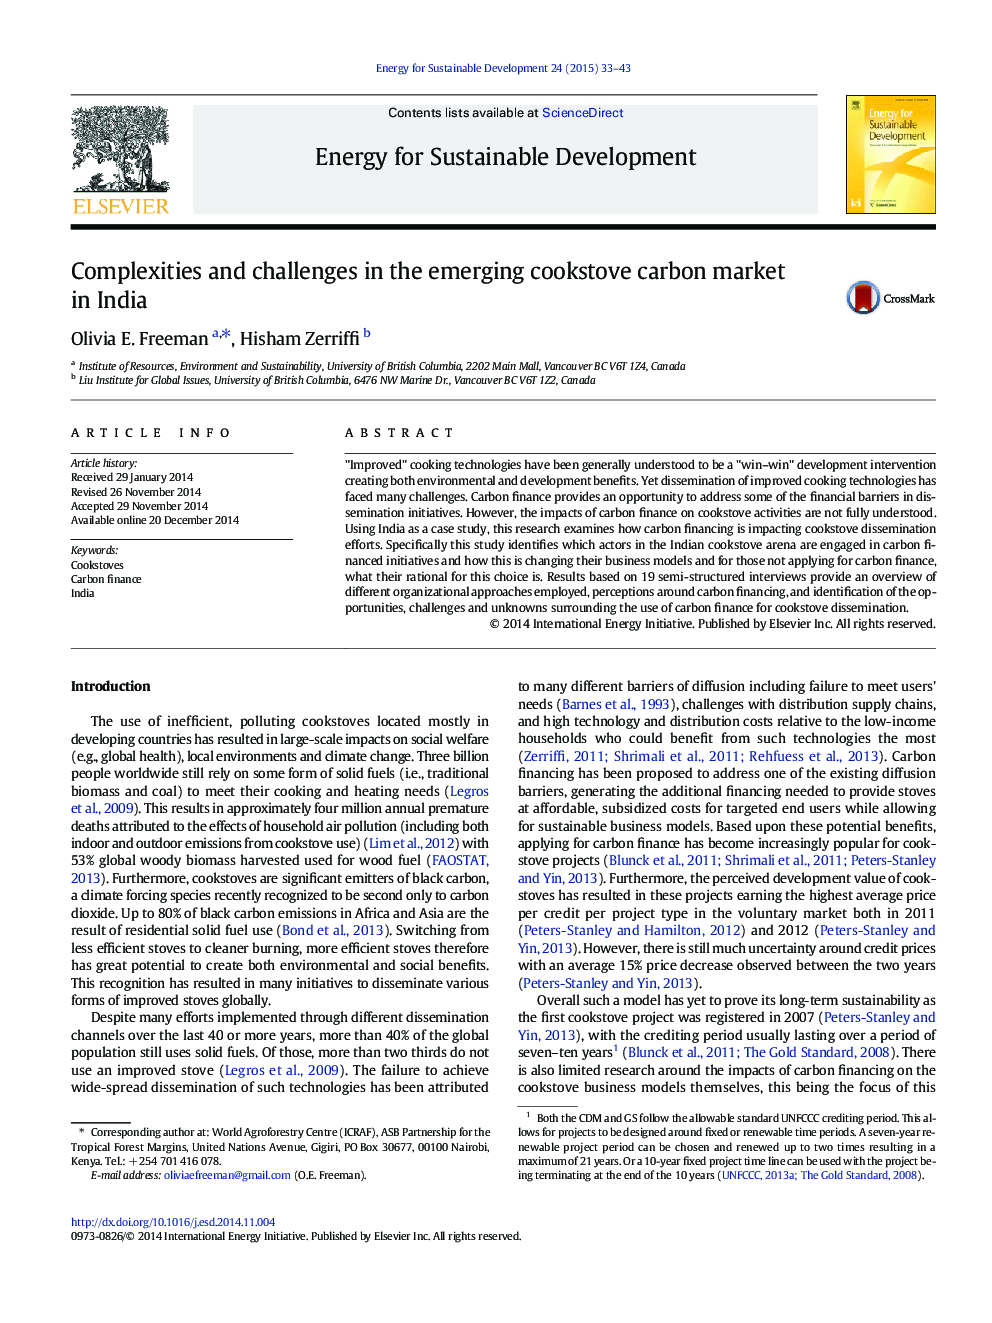 Complexities and challenges in the emerging cookstove carbon market in India